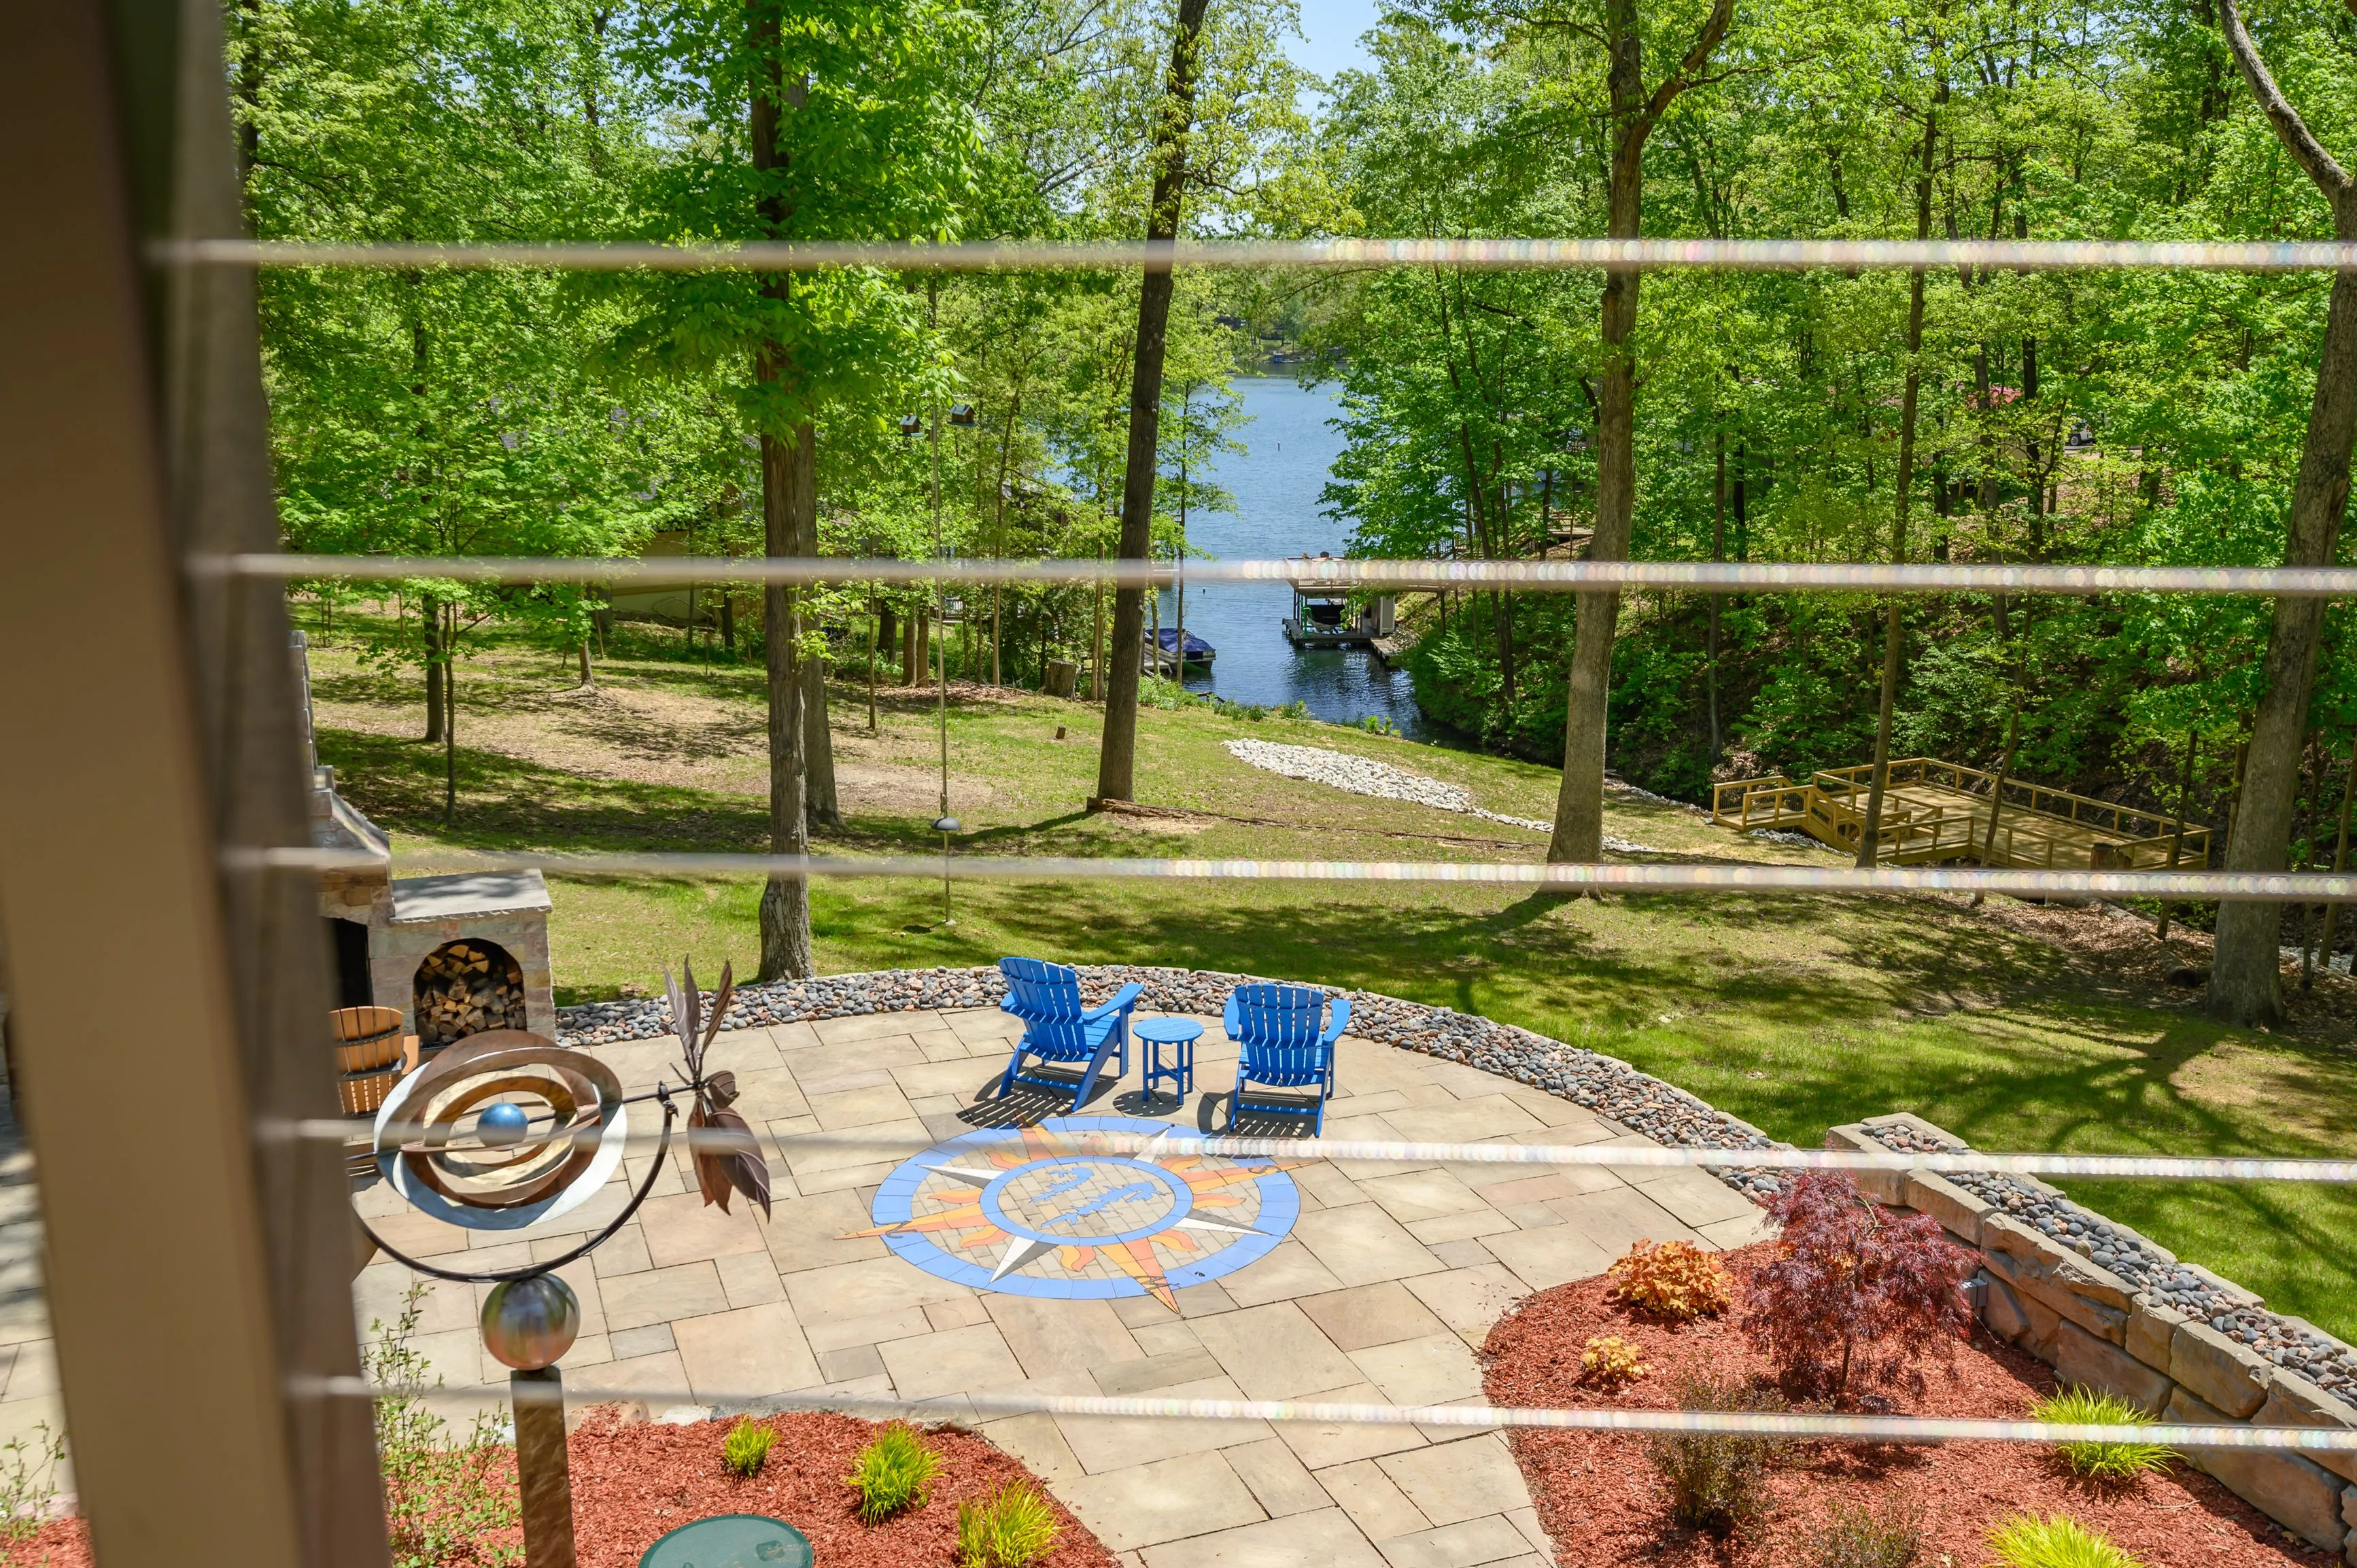 View of a patio with chairs and a fire pit through a window, overlooking a garden and lake in the distance.